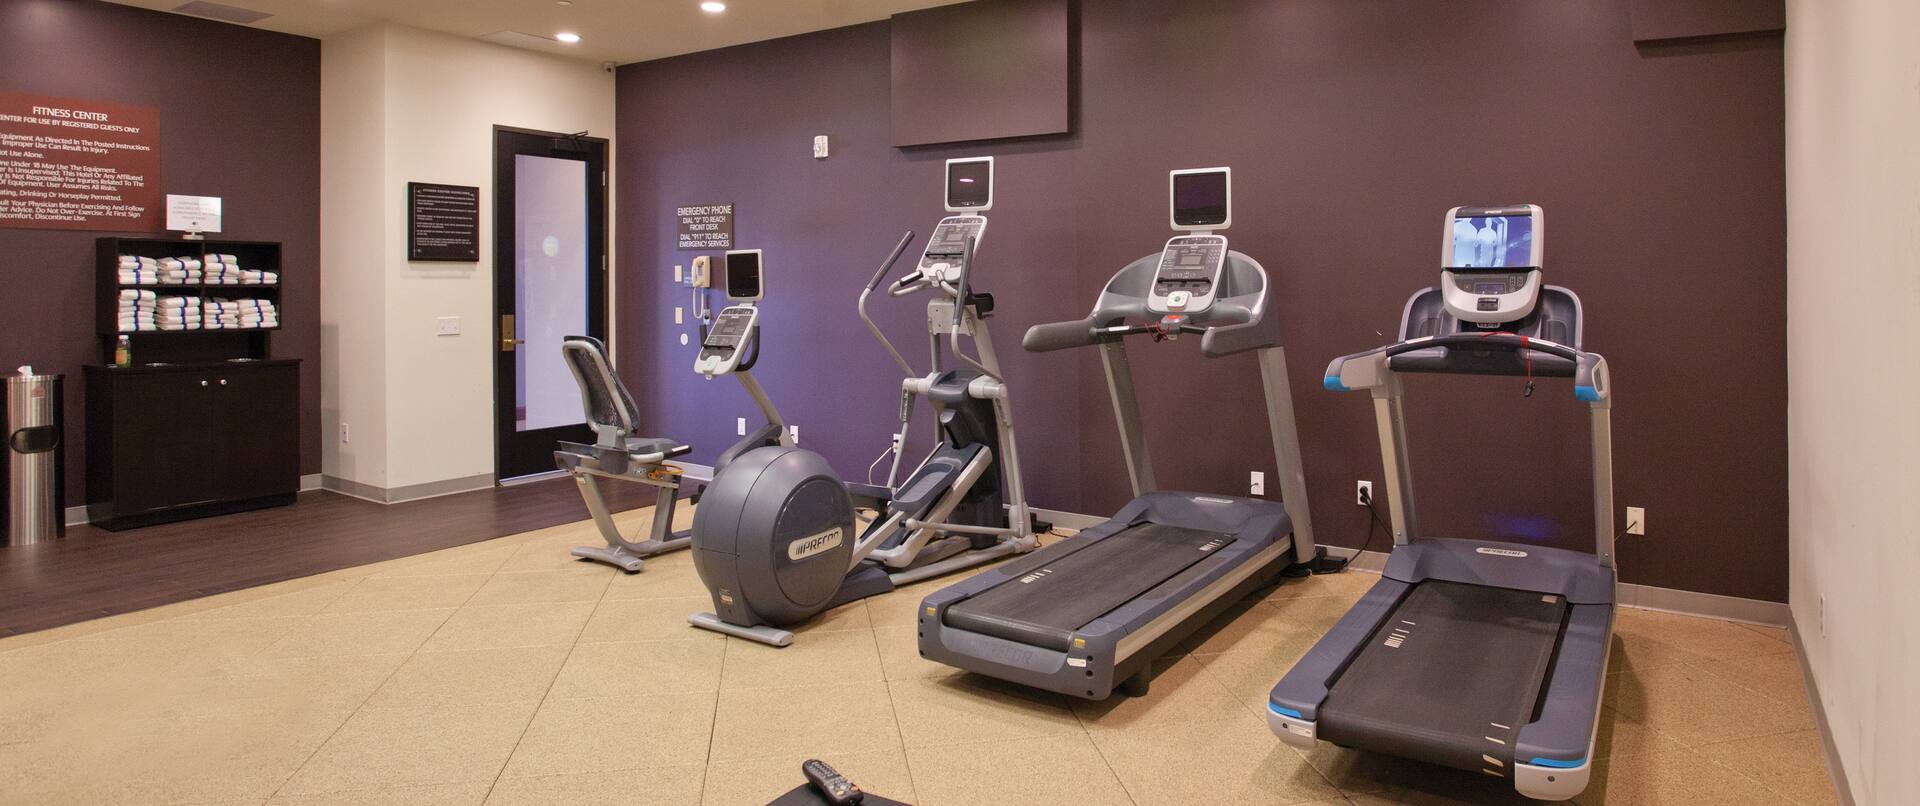 Fitness Center with Treadmills and Exercise Bike